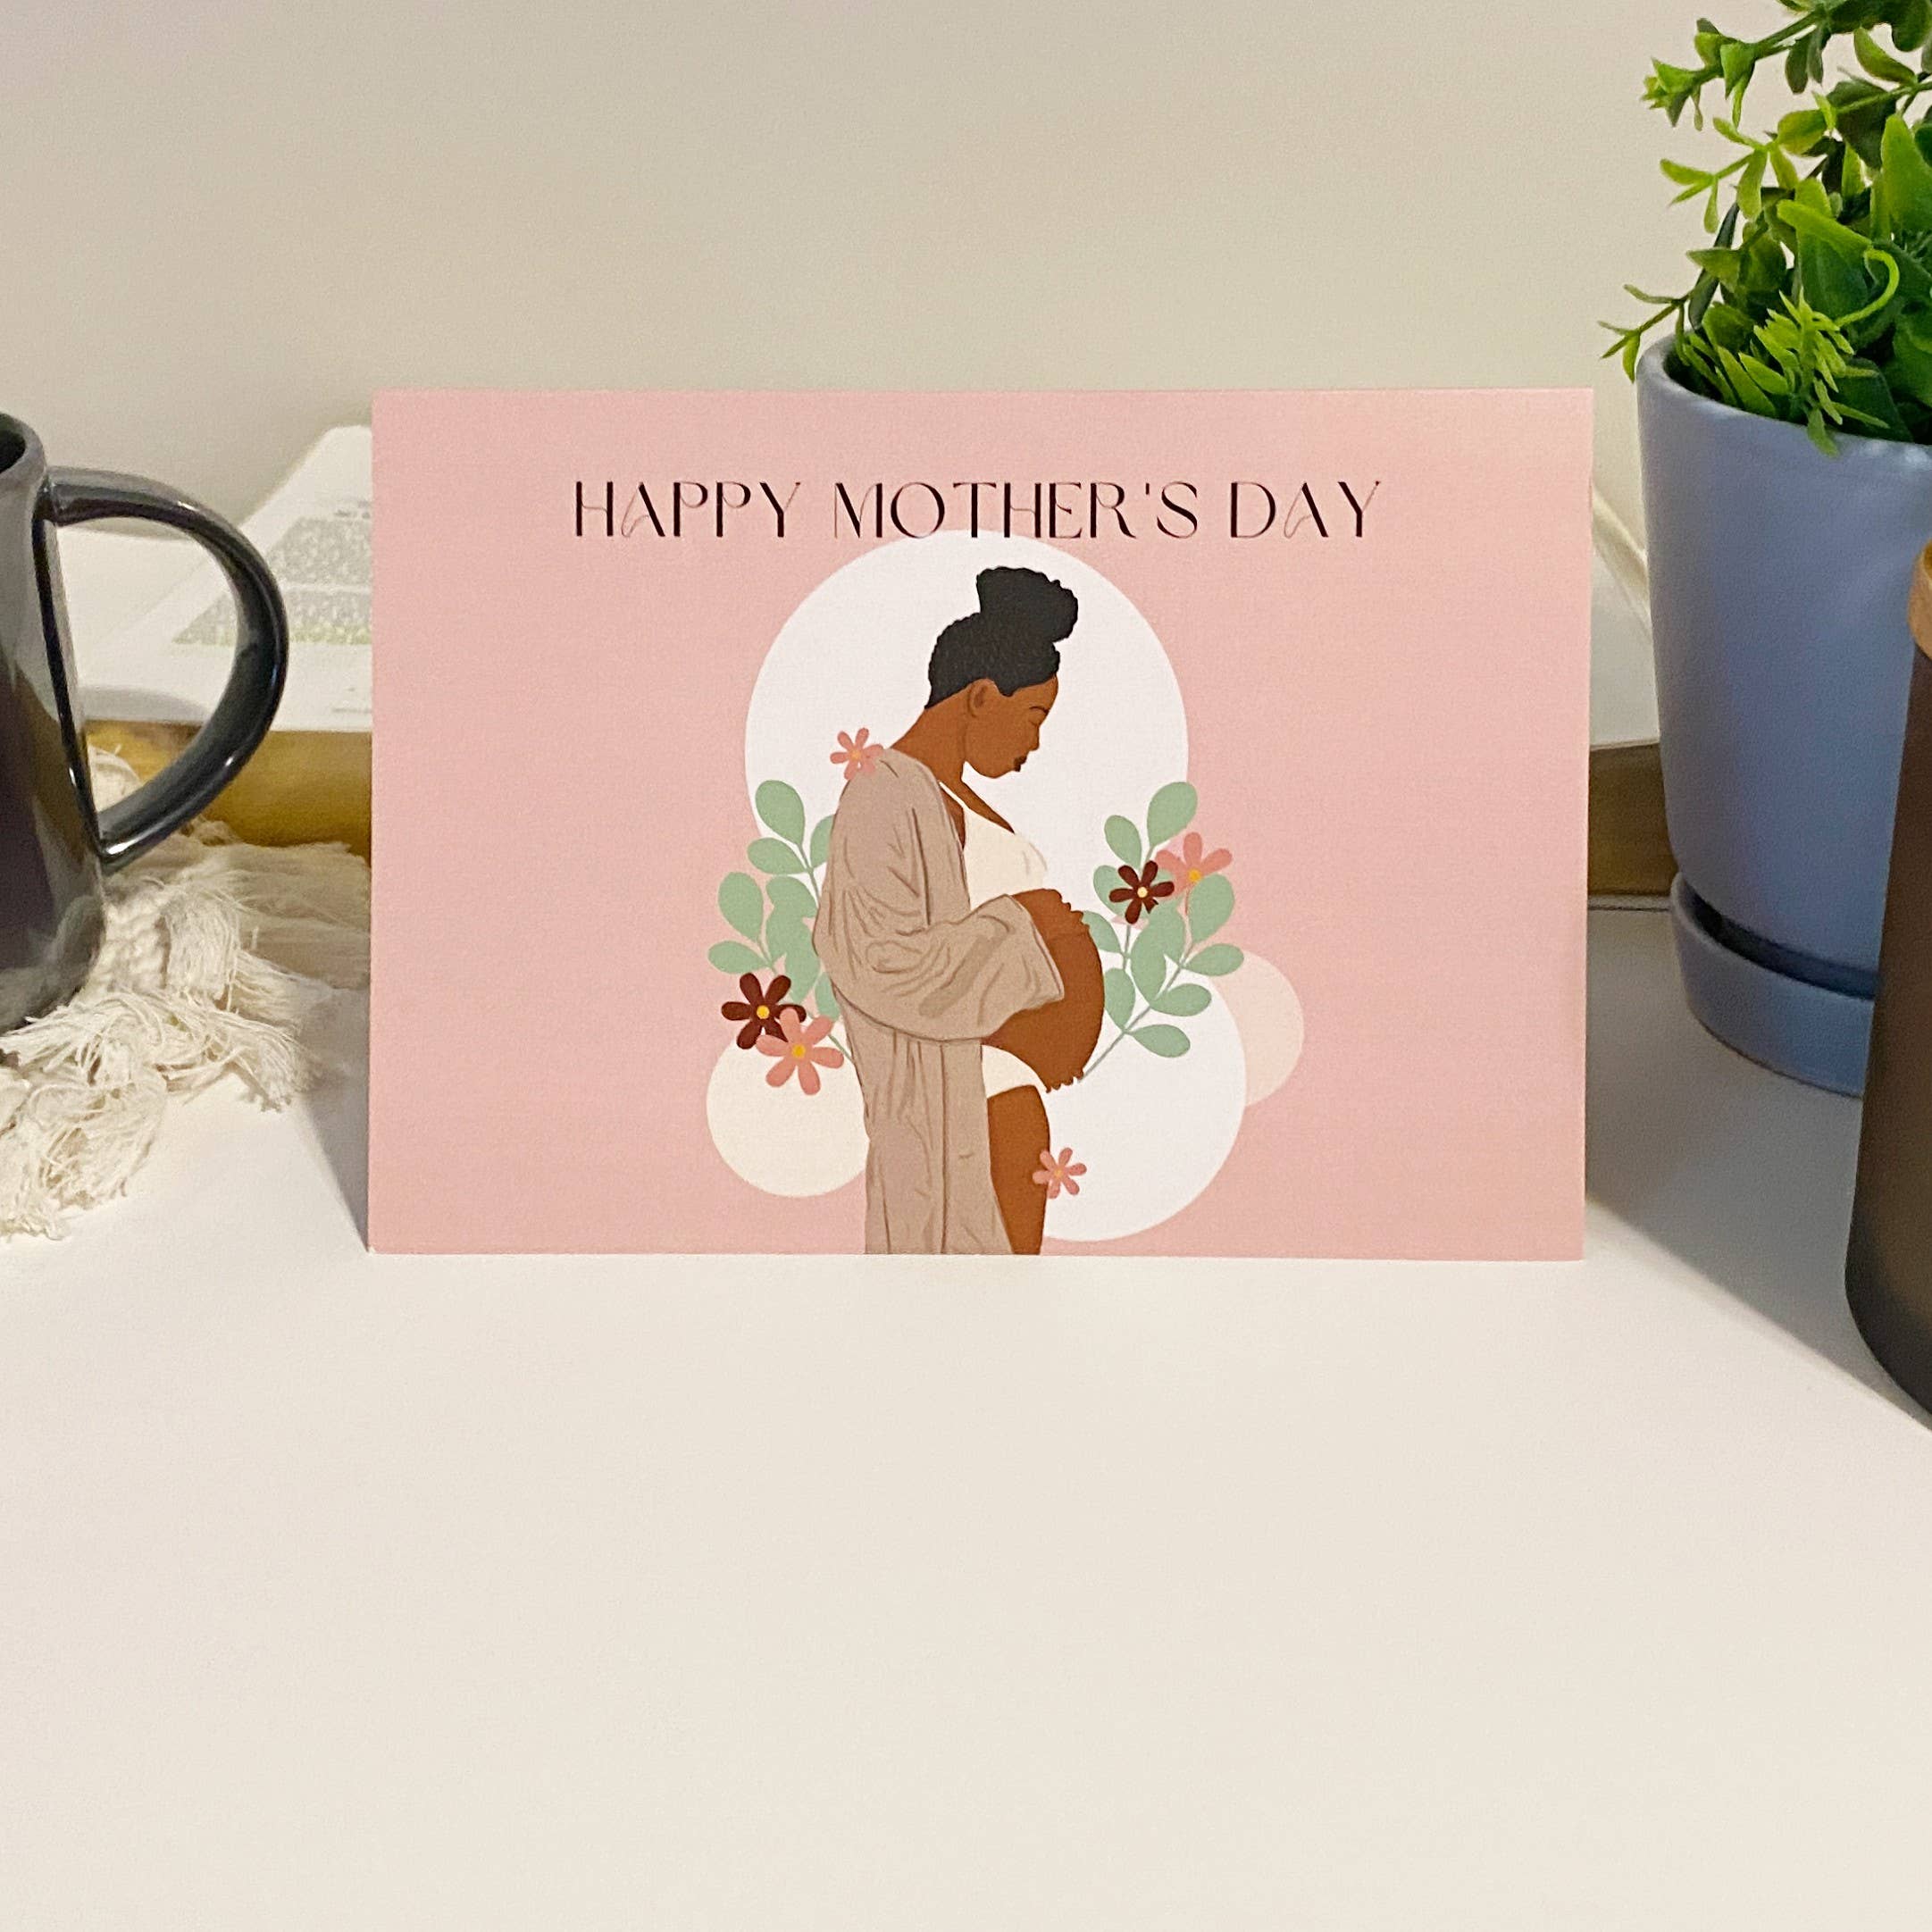 Mother's Day Greeting Card - Expecting Moms